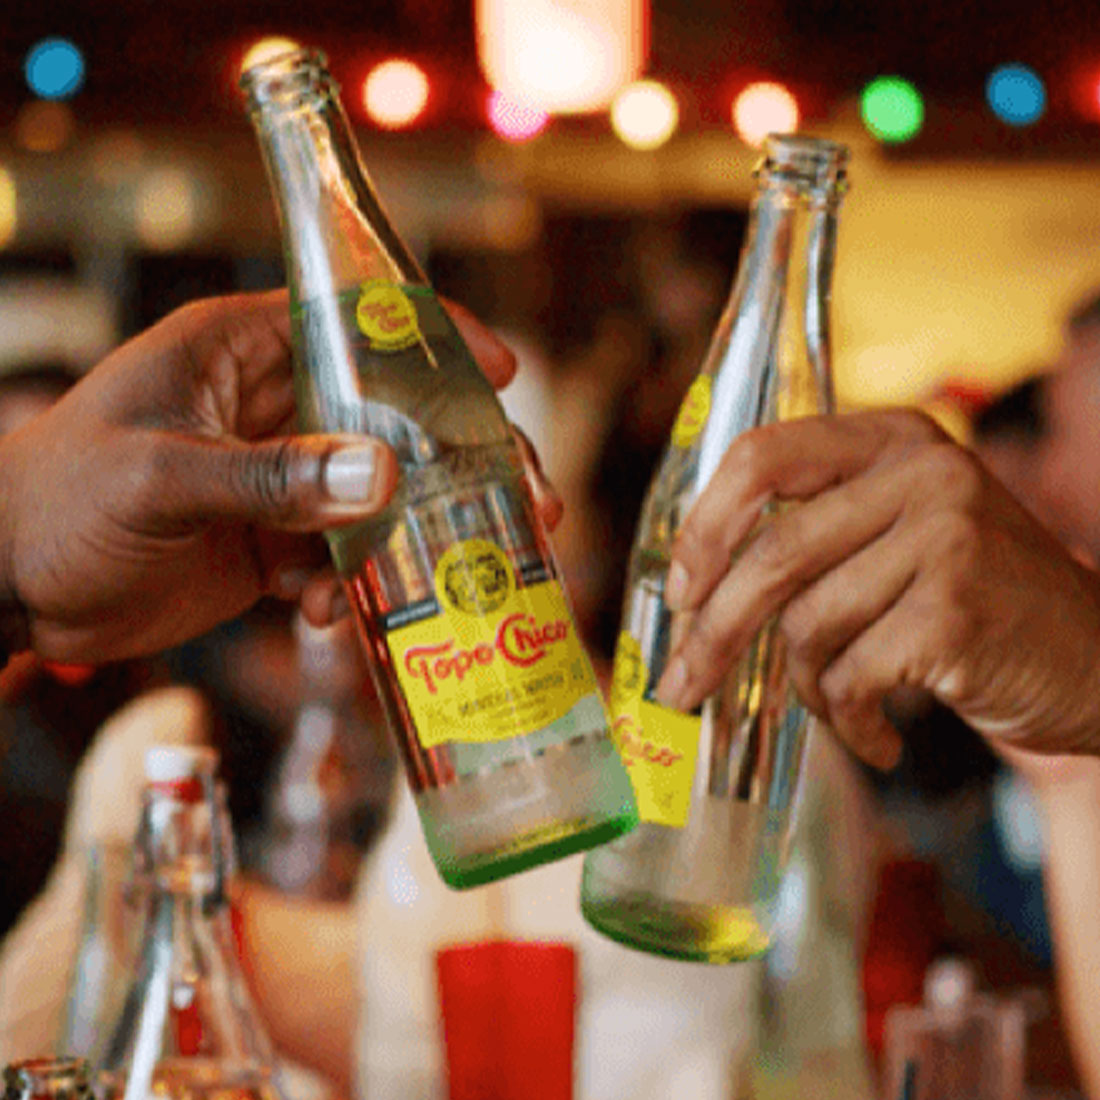 Close up of two hands toasting with two Topo Chico bottles